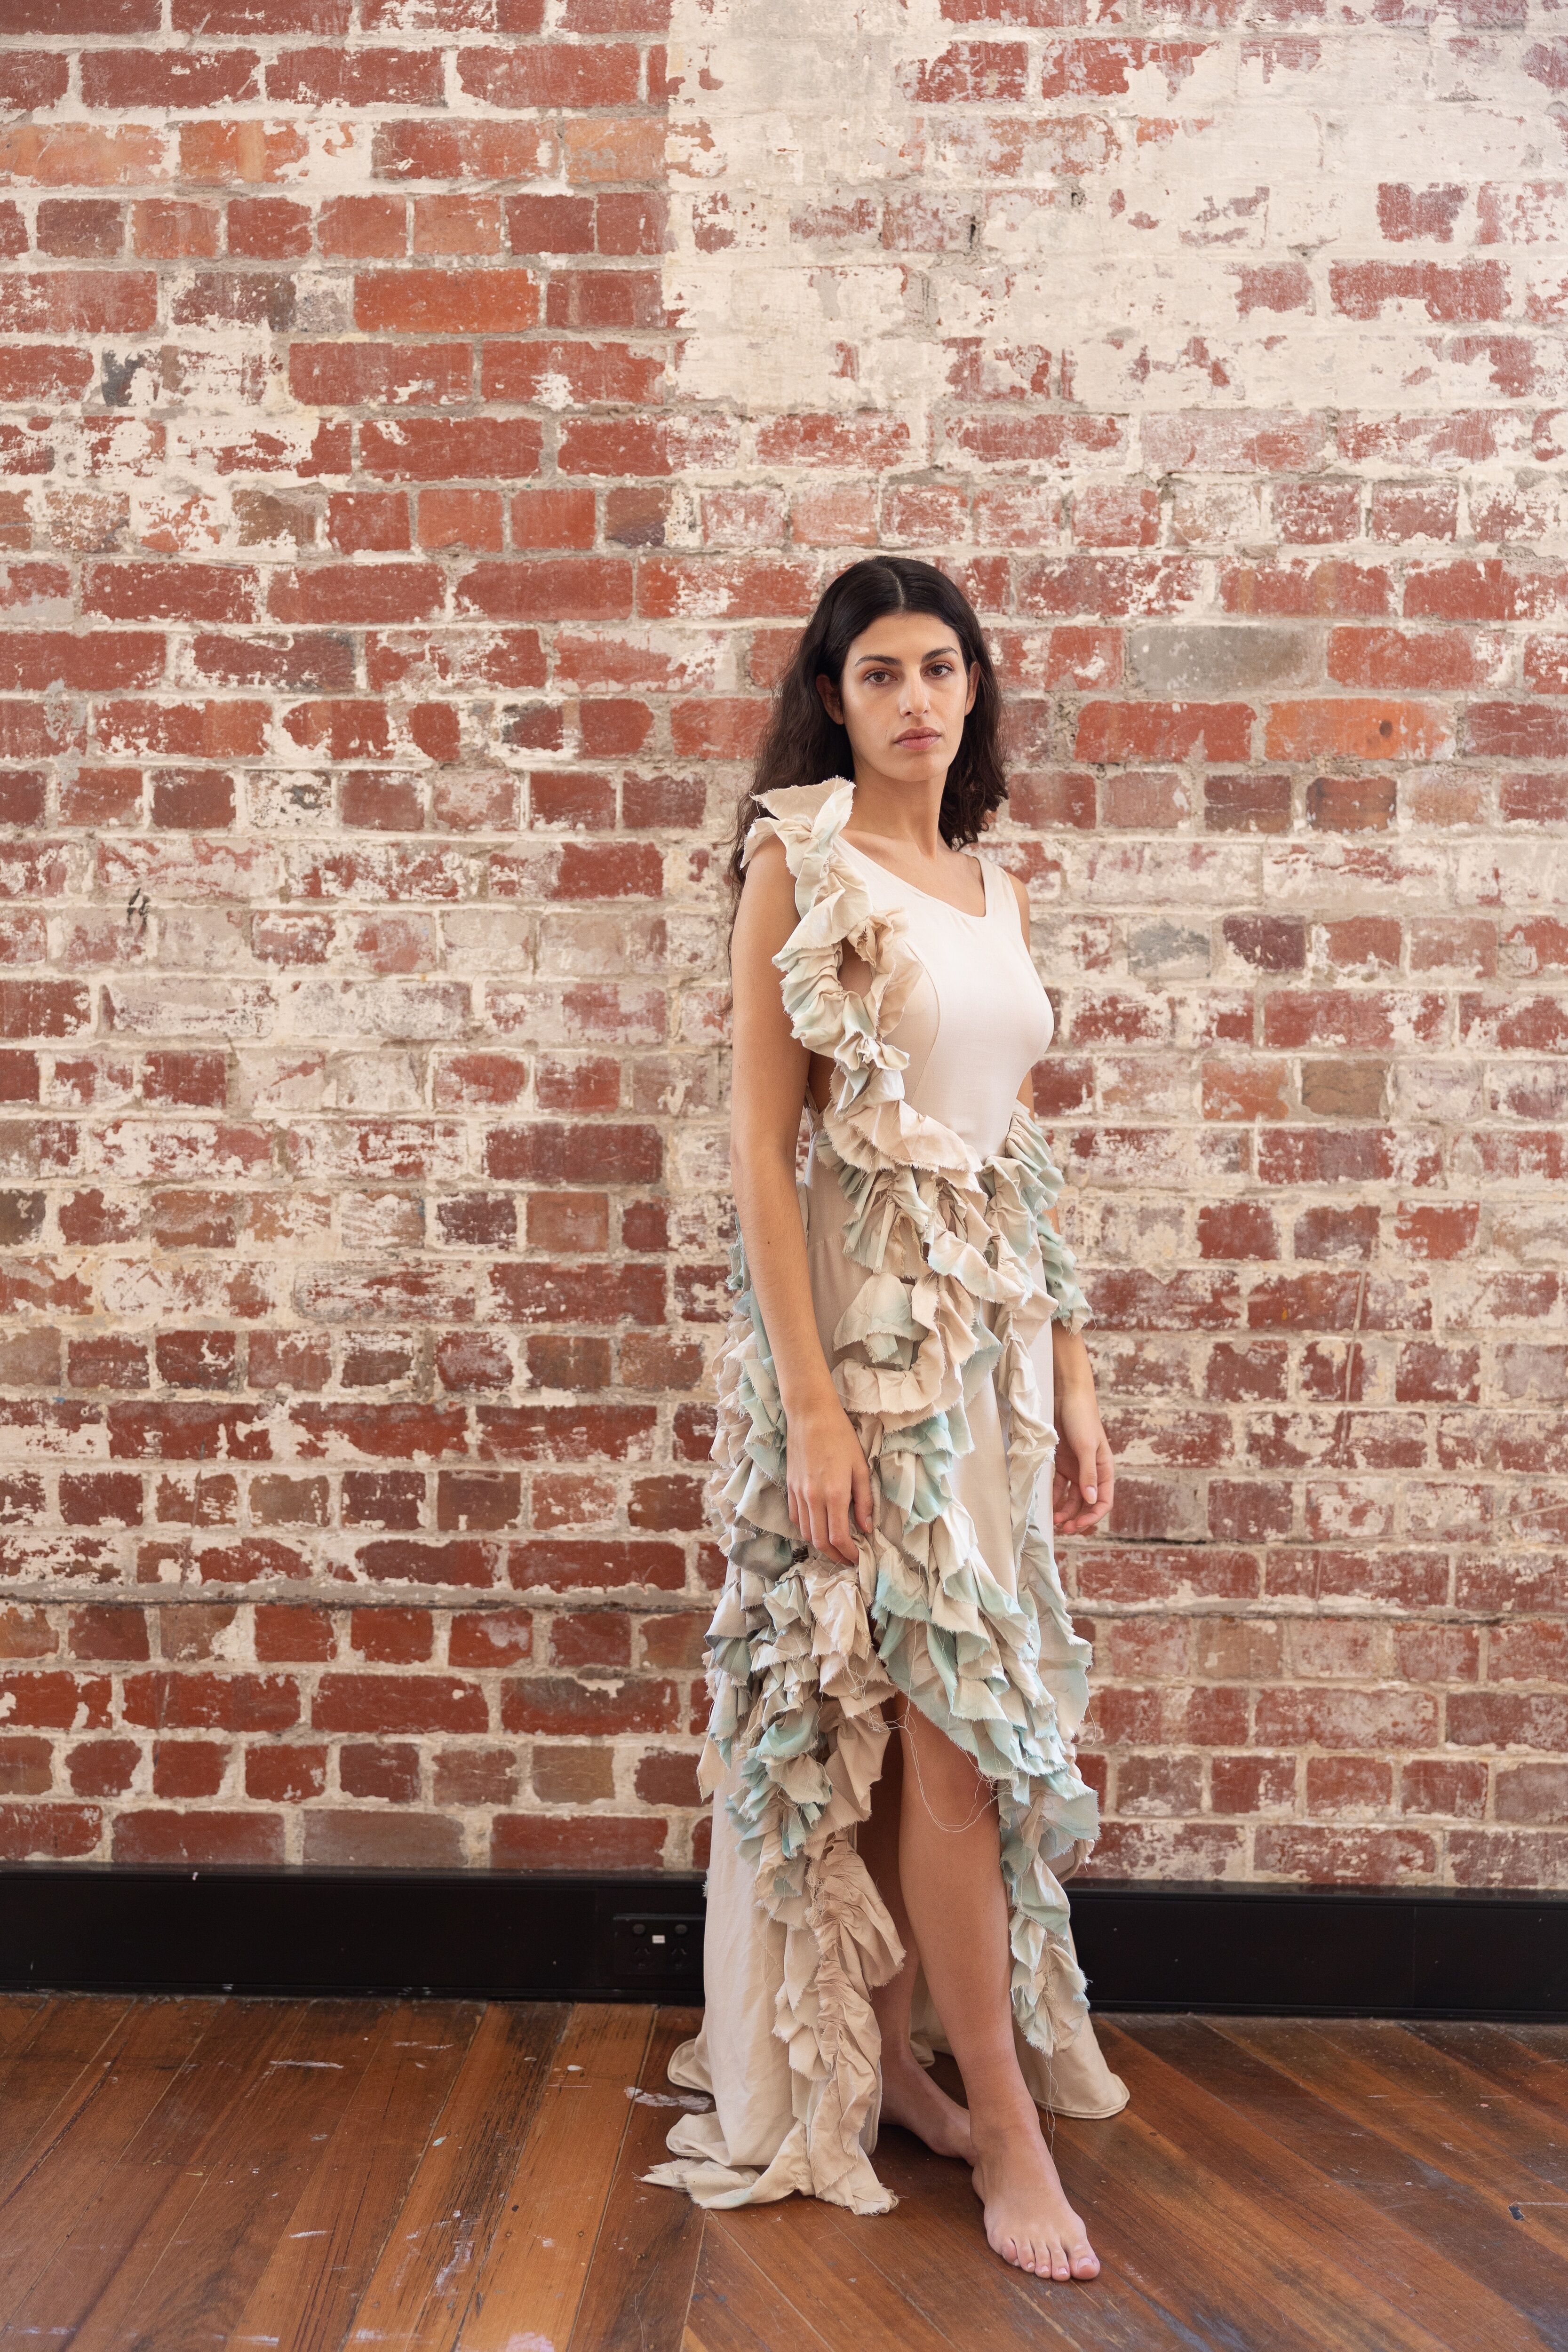 A poised woman stands against a rustic brick wall, her flowing dress adorned with delicate, petal-like ruffles, embodying a graceful juxtaposition of urbanity and natural forms.